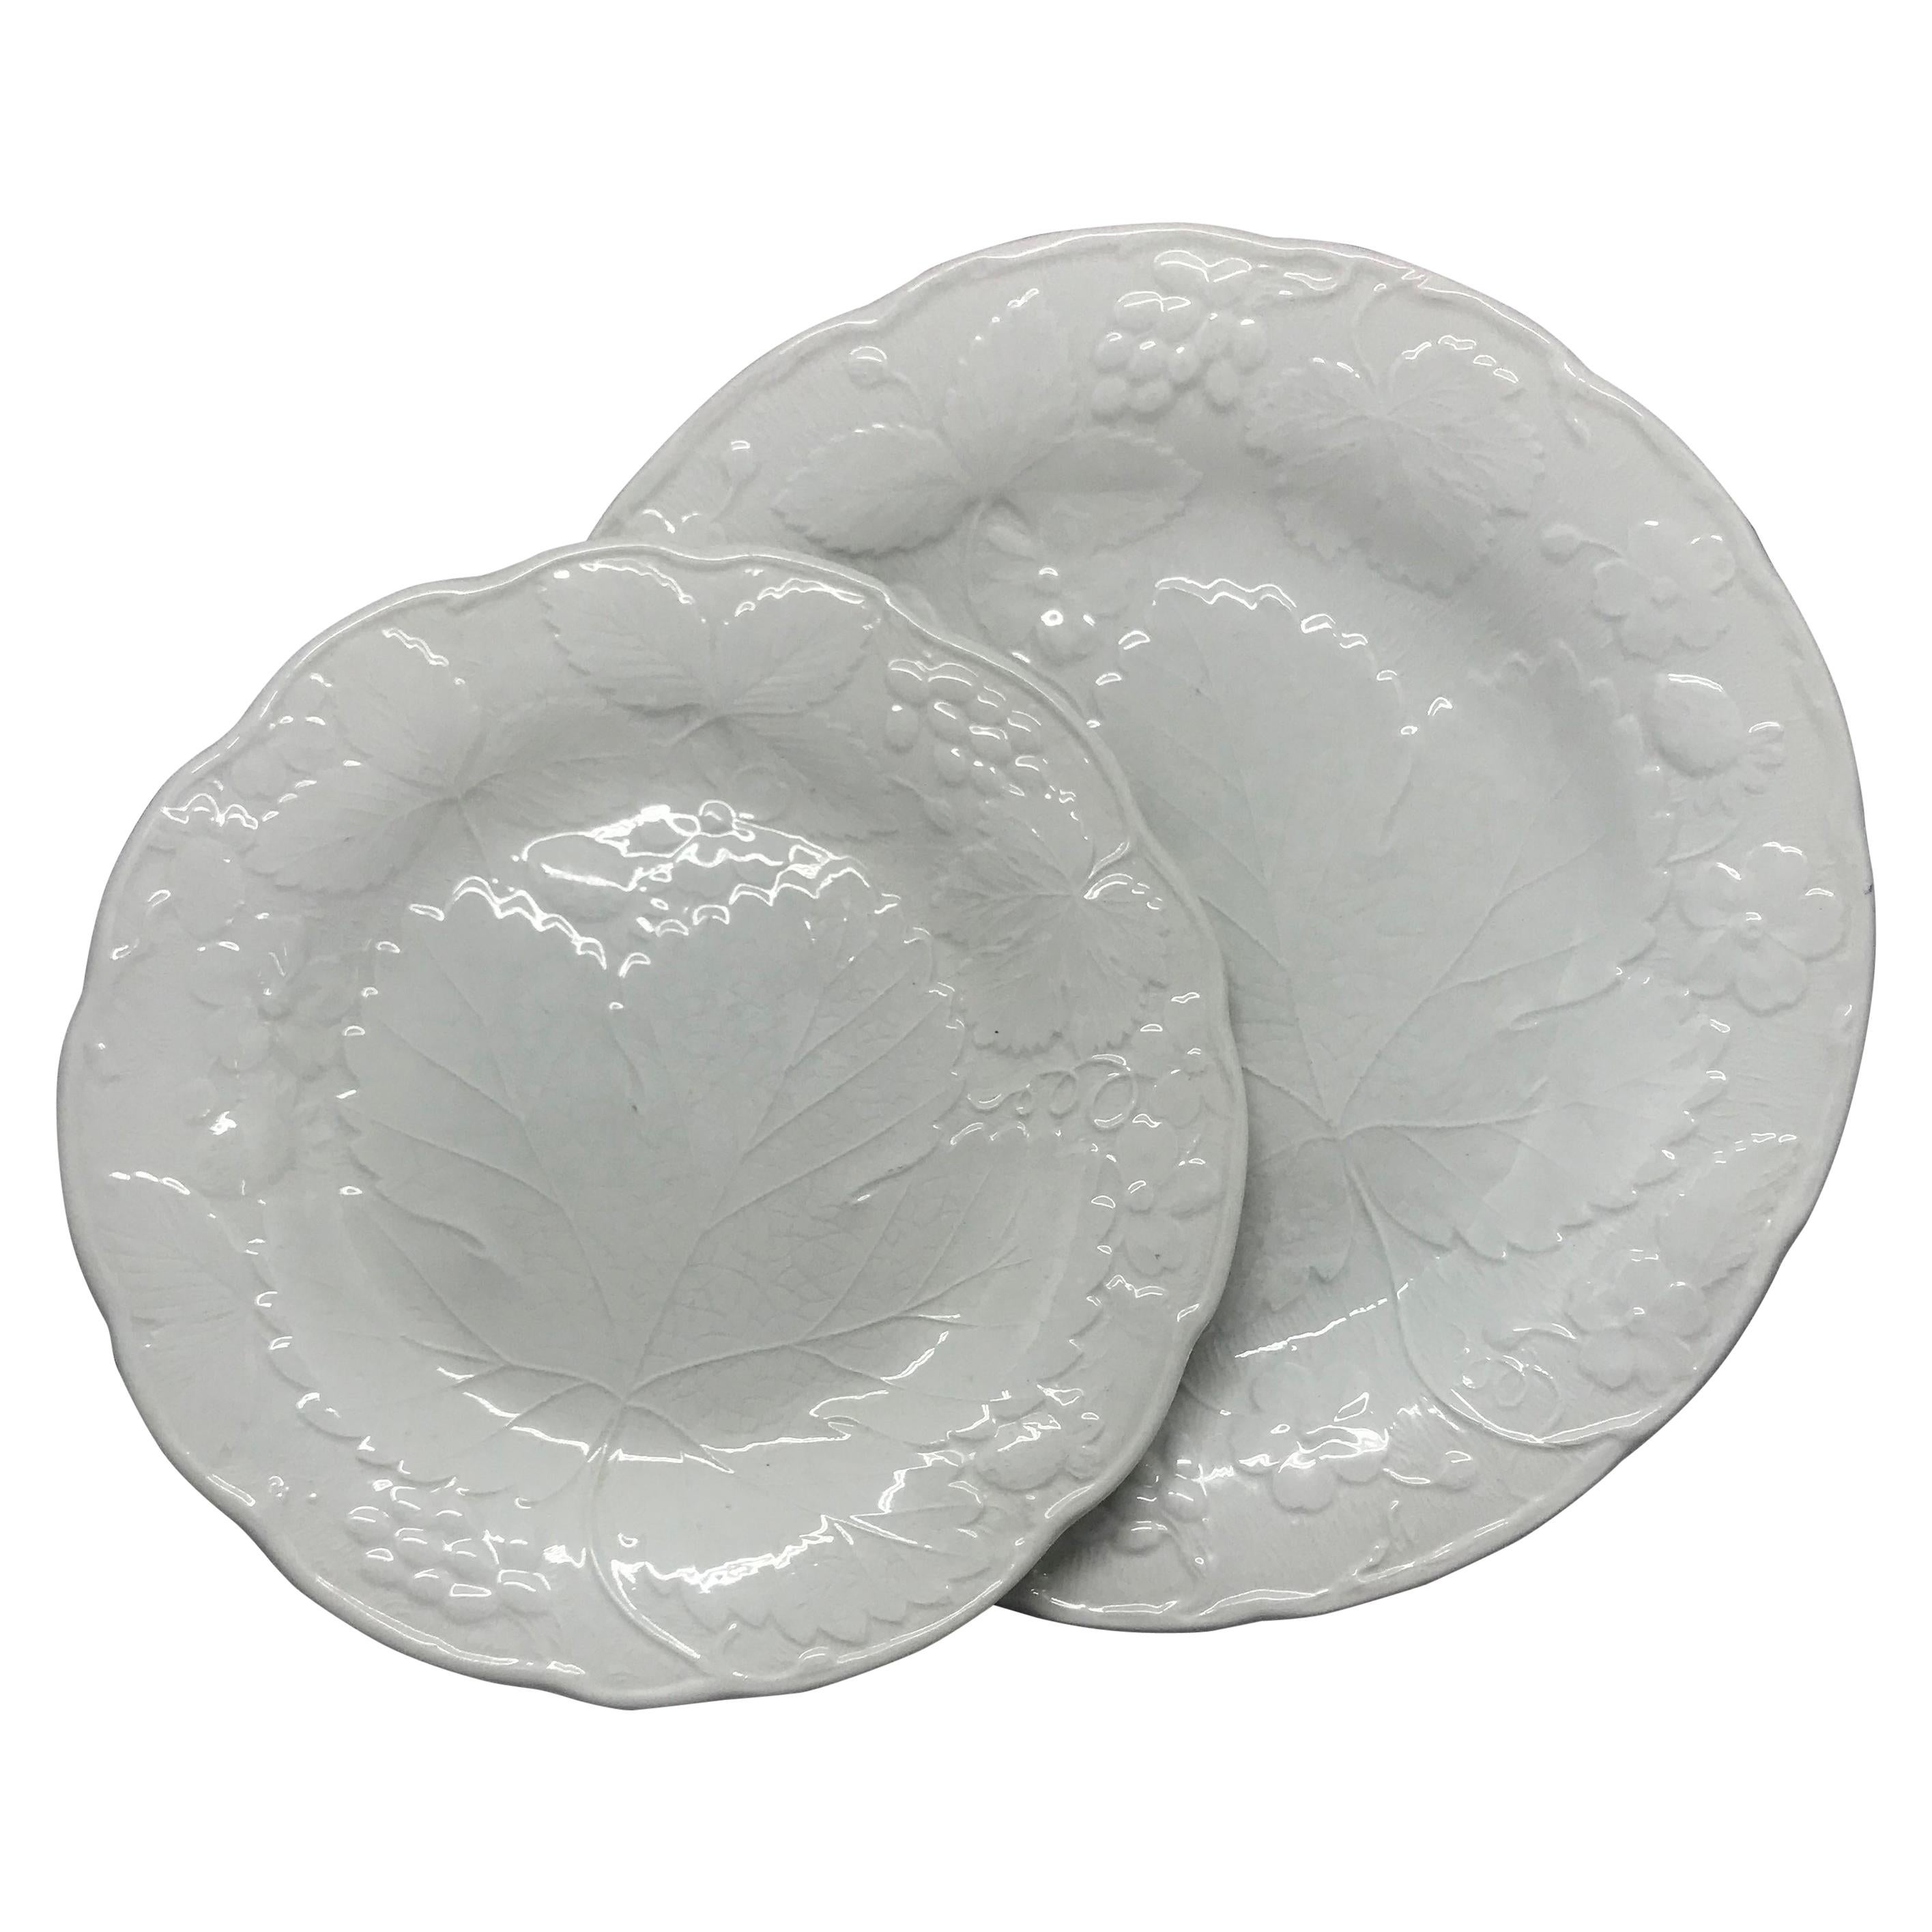 Set of ten white strawberry leaf lunch/dessert plates. Davenport Burleigh luncheon plates in the strawberry and grape leaf pattern, England, 20th century.
Luncheon plate dimensions: 8.13 diameter.

Matching dinner plates available on separate